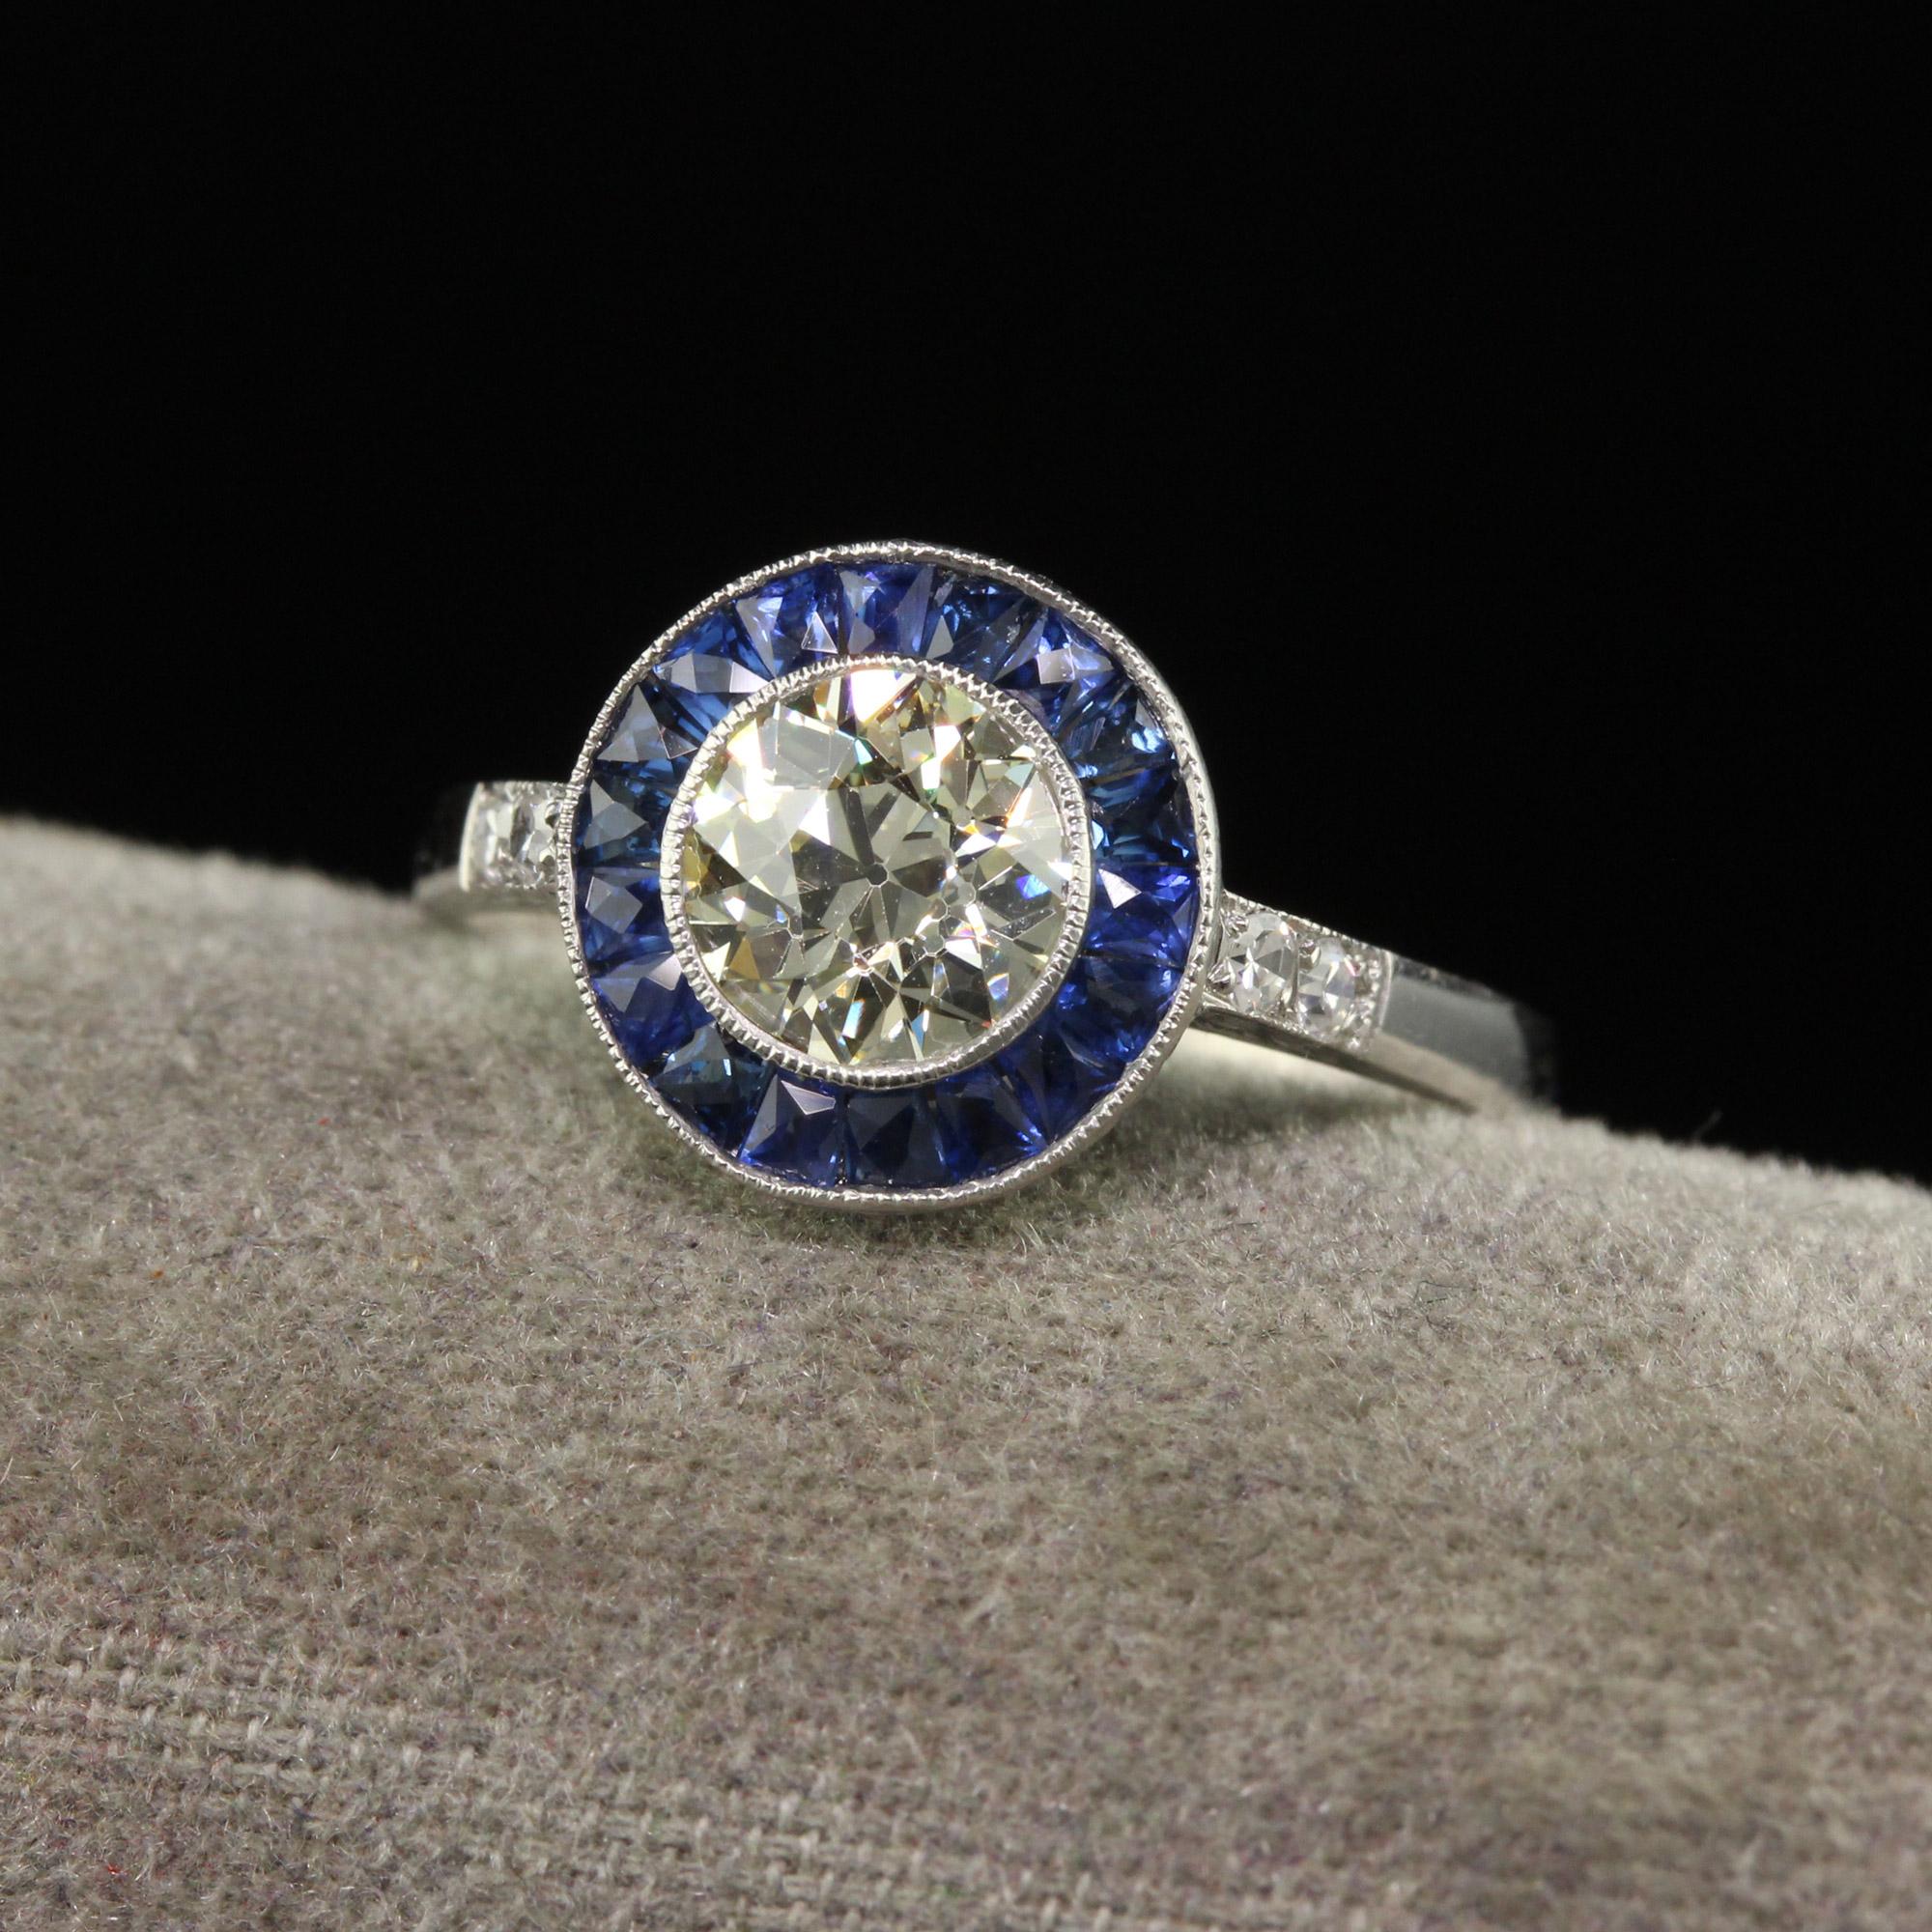 Beautiful Vintage Art Deco Style Platinum Old European Diamond and Sapphire Halo Engagement Ring - GIA. This gorgeous engagement ring is crafted in platinum. The center is set with an old European cut diamond that has a GIA report and is surrounded